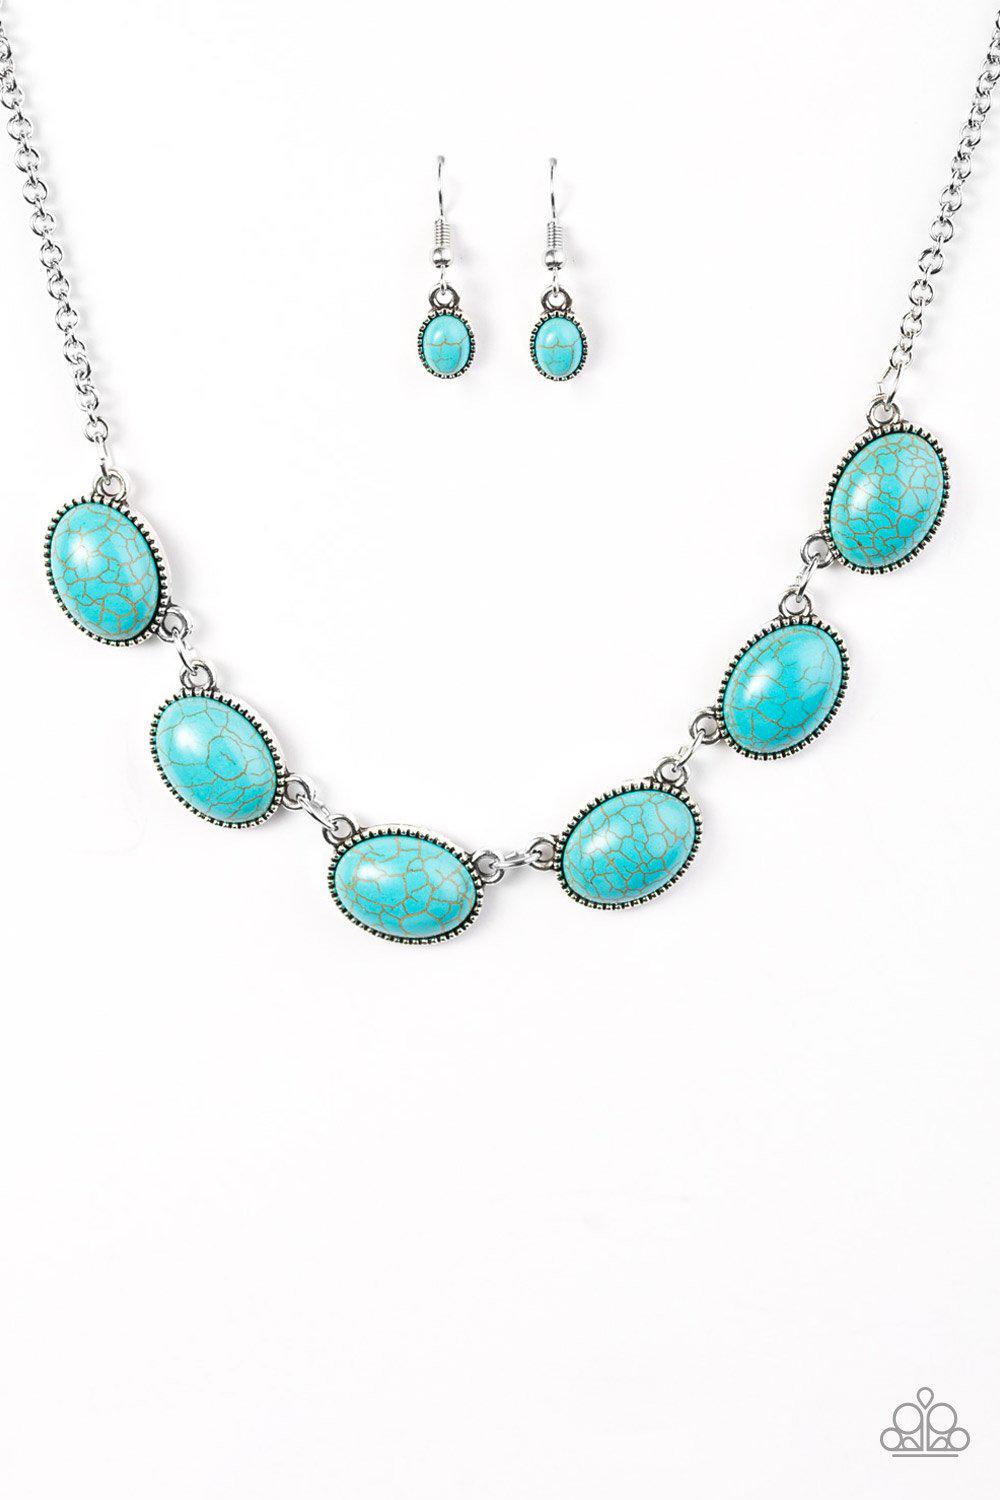 River Song Blue Turquoise Stone Necklace and matching Earrings - Paparazzi Accessories-CarasShop.com - $5 Jewelry by Cara Jewels